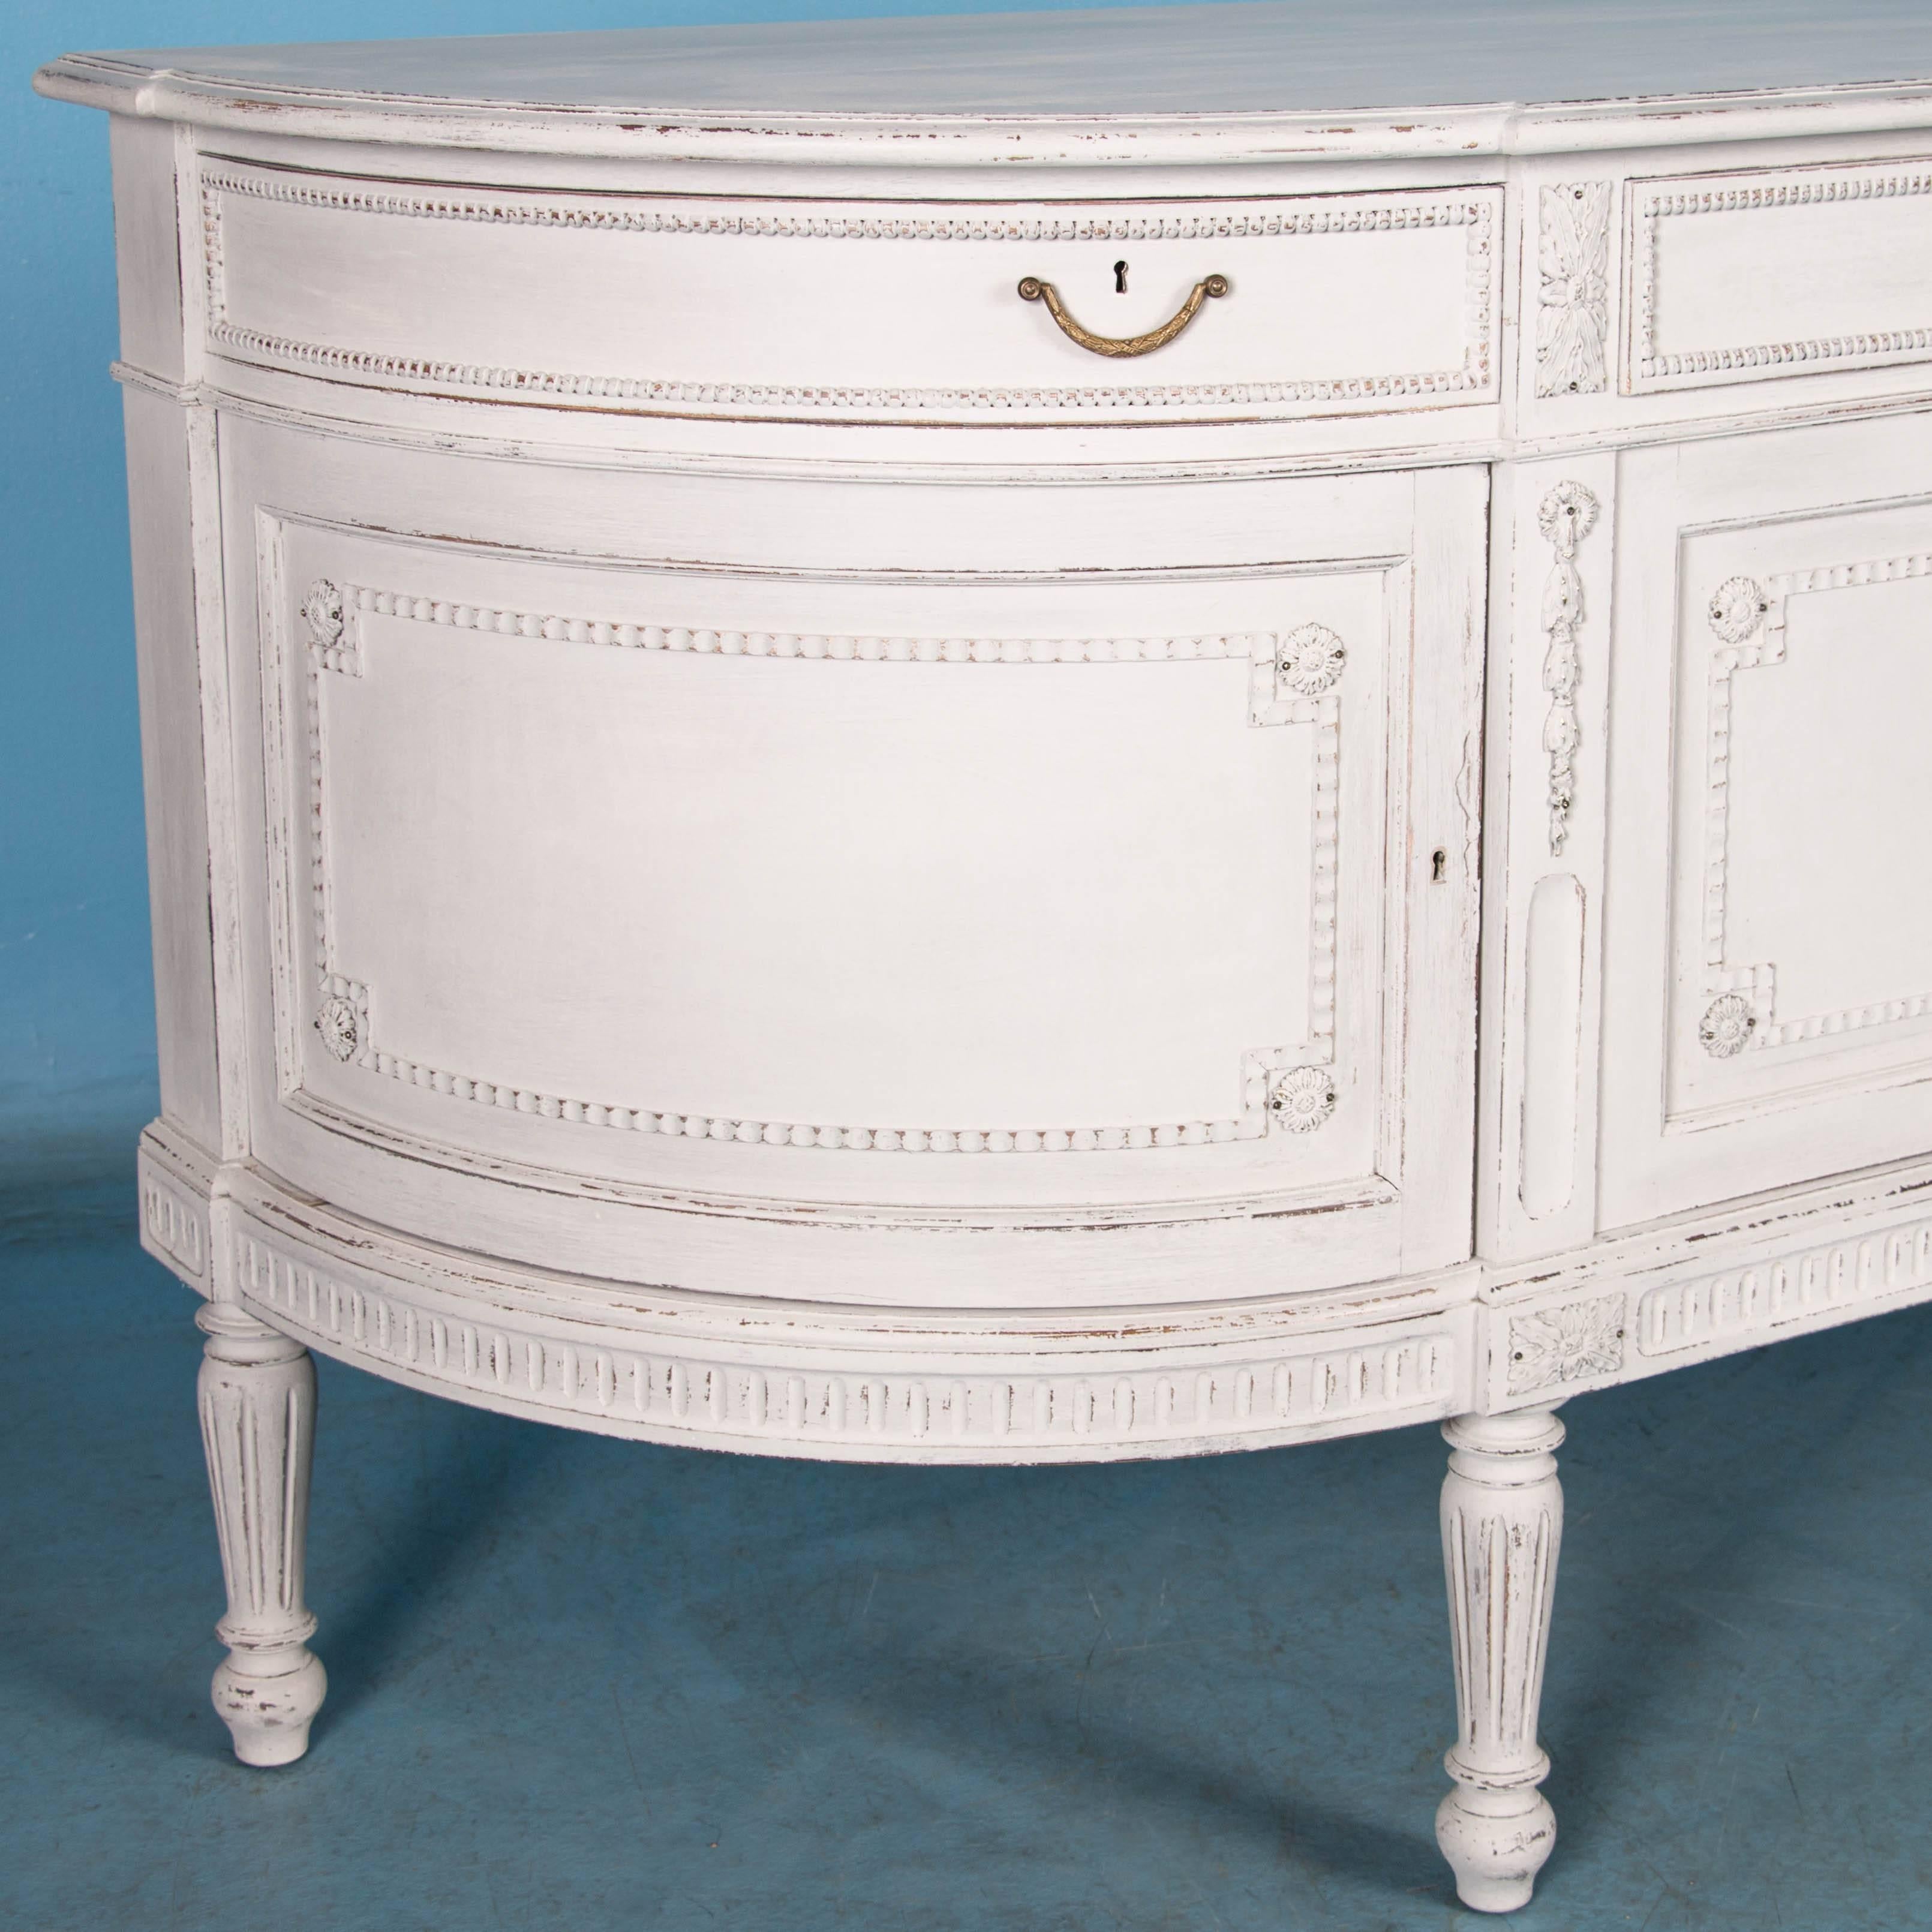 19th Century Antique Swedish Gustavian Sideboard Painted White